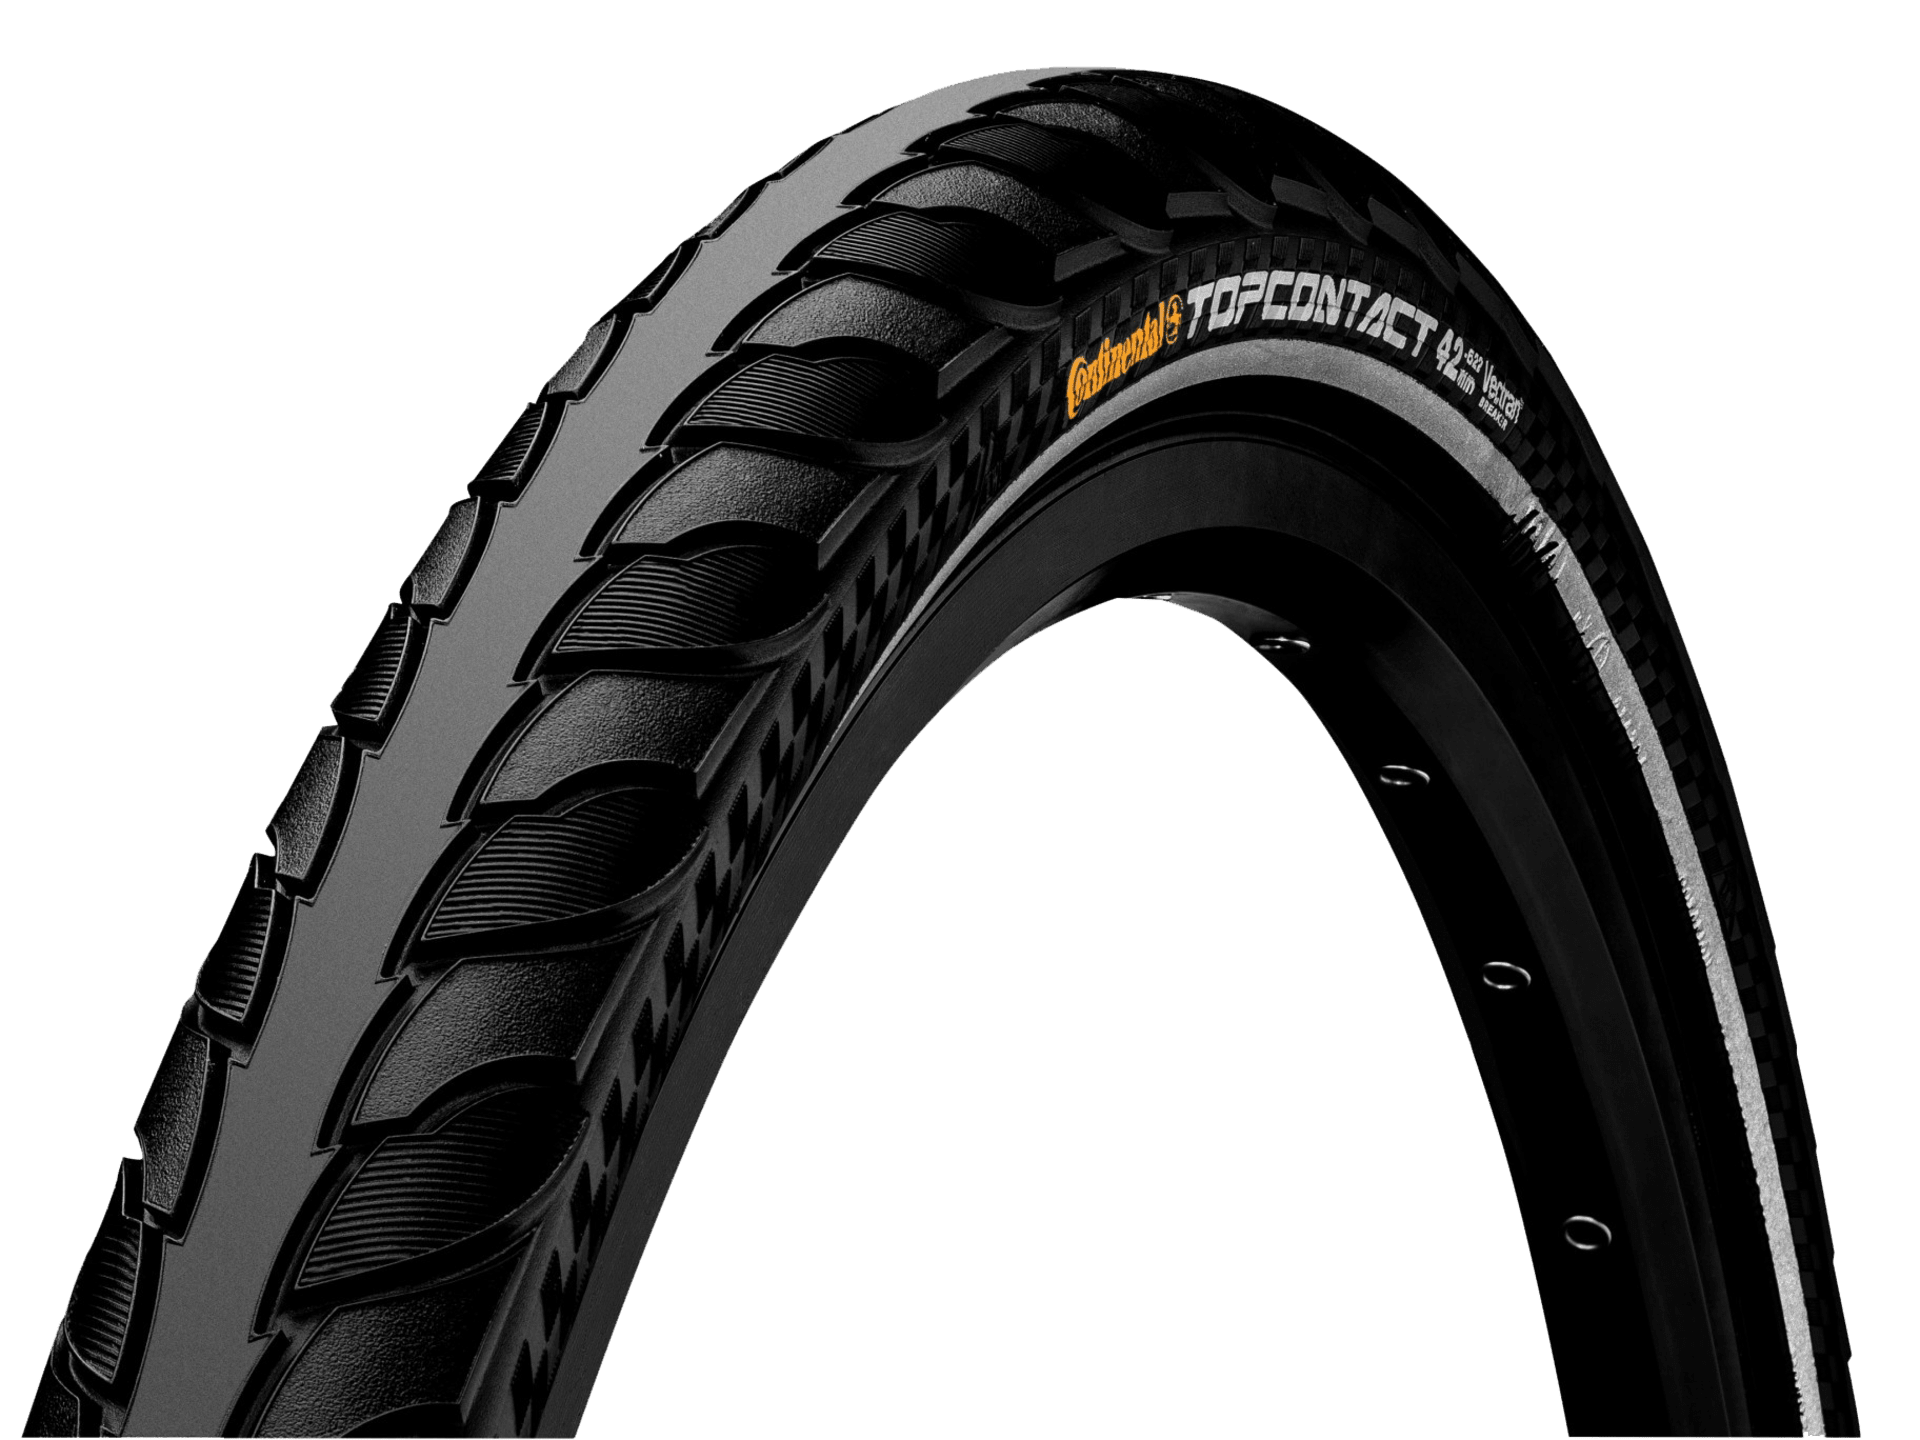 Continental Top CONTACT II Hybrid Tire